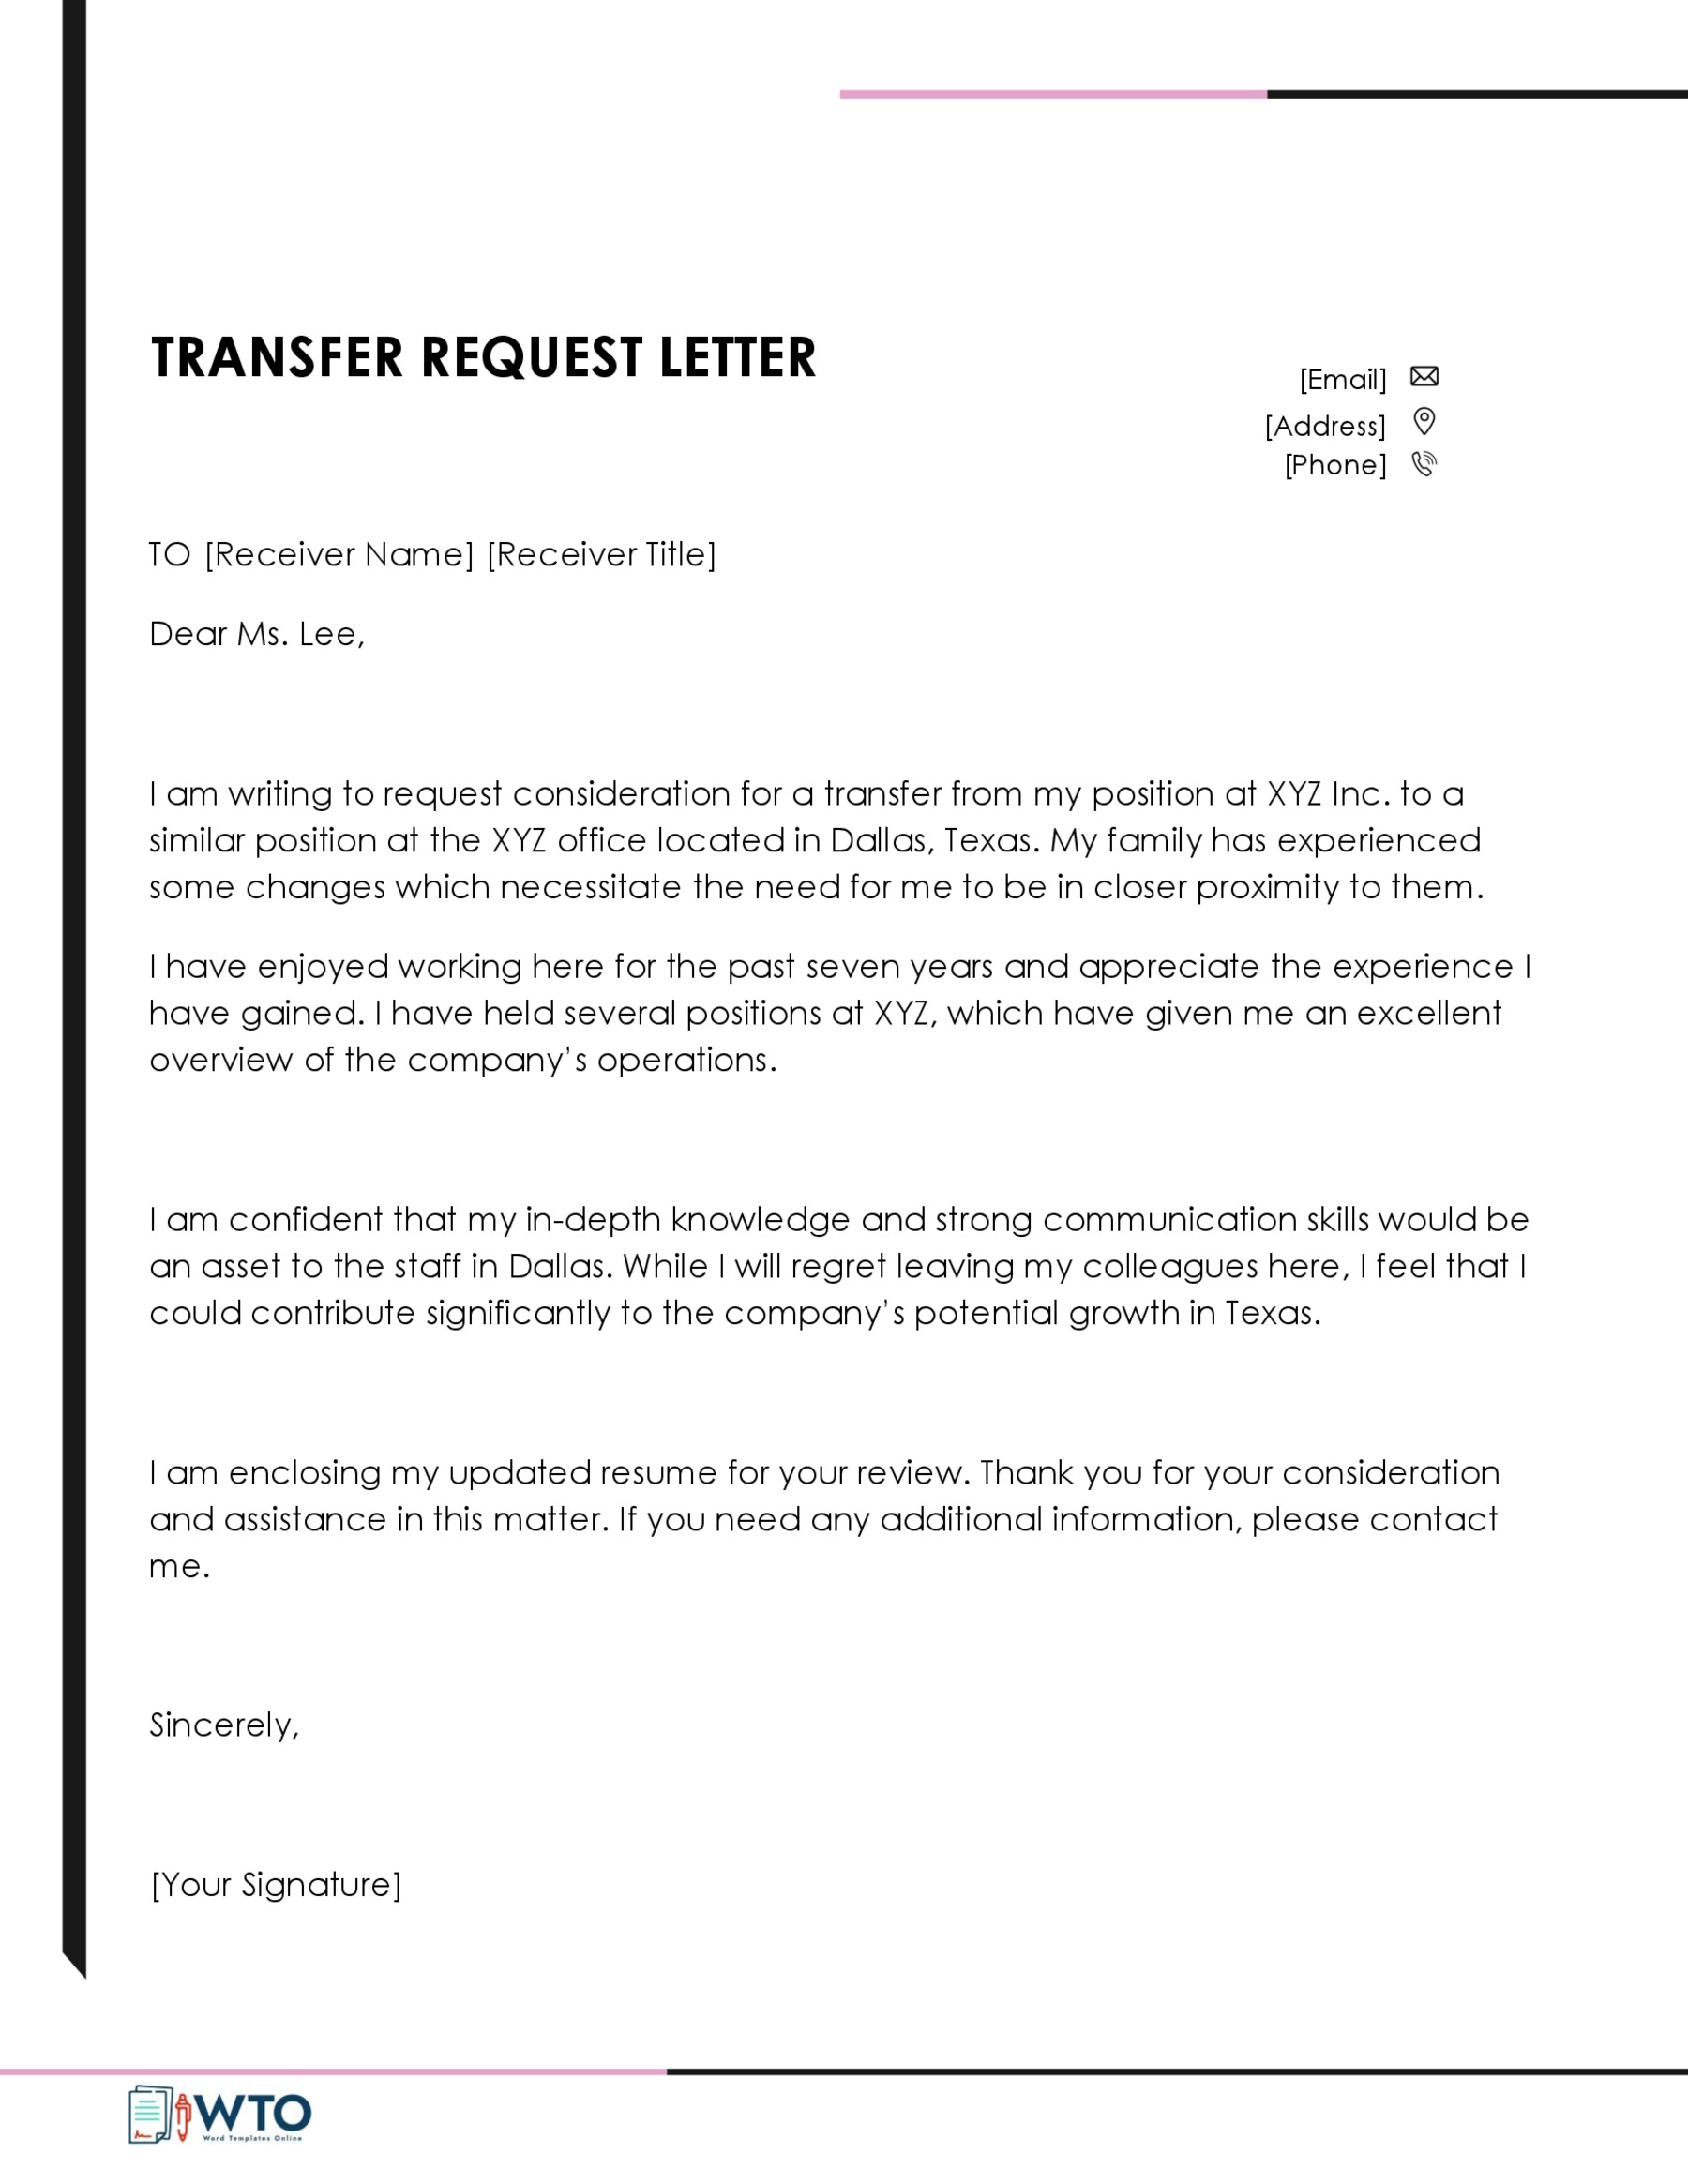 Best Printable Transfer Request Letter Sample 15 in Word Format